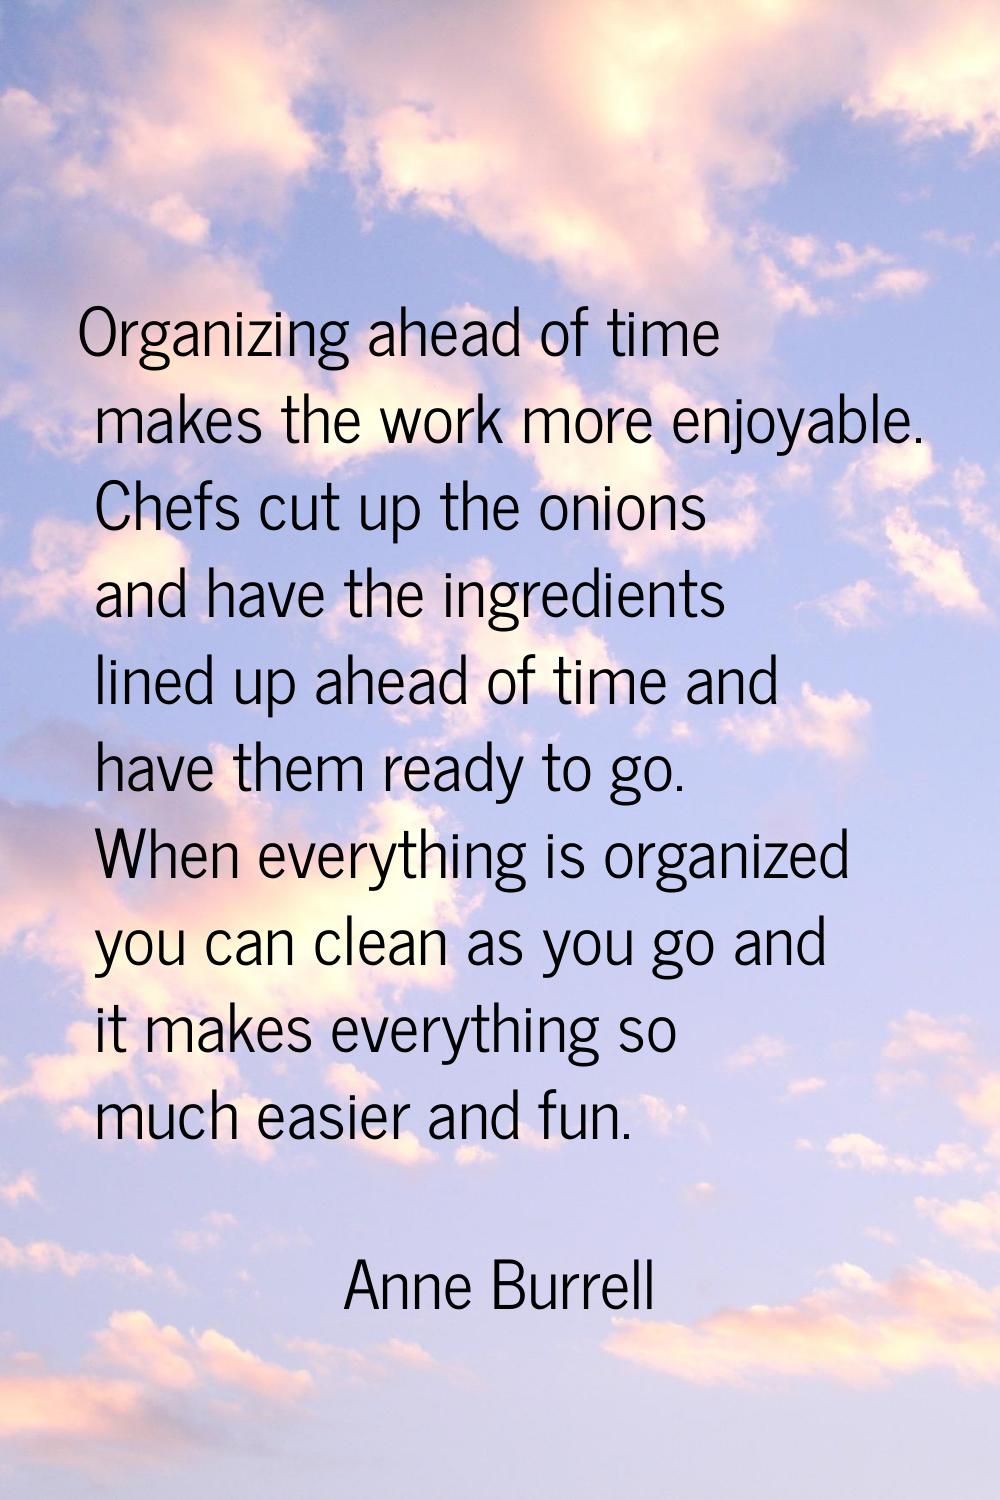 Organizing ahead of time makes the work more enjoyable. Chefs cut up the onions and have the ingred